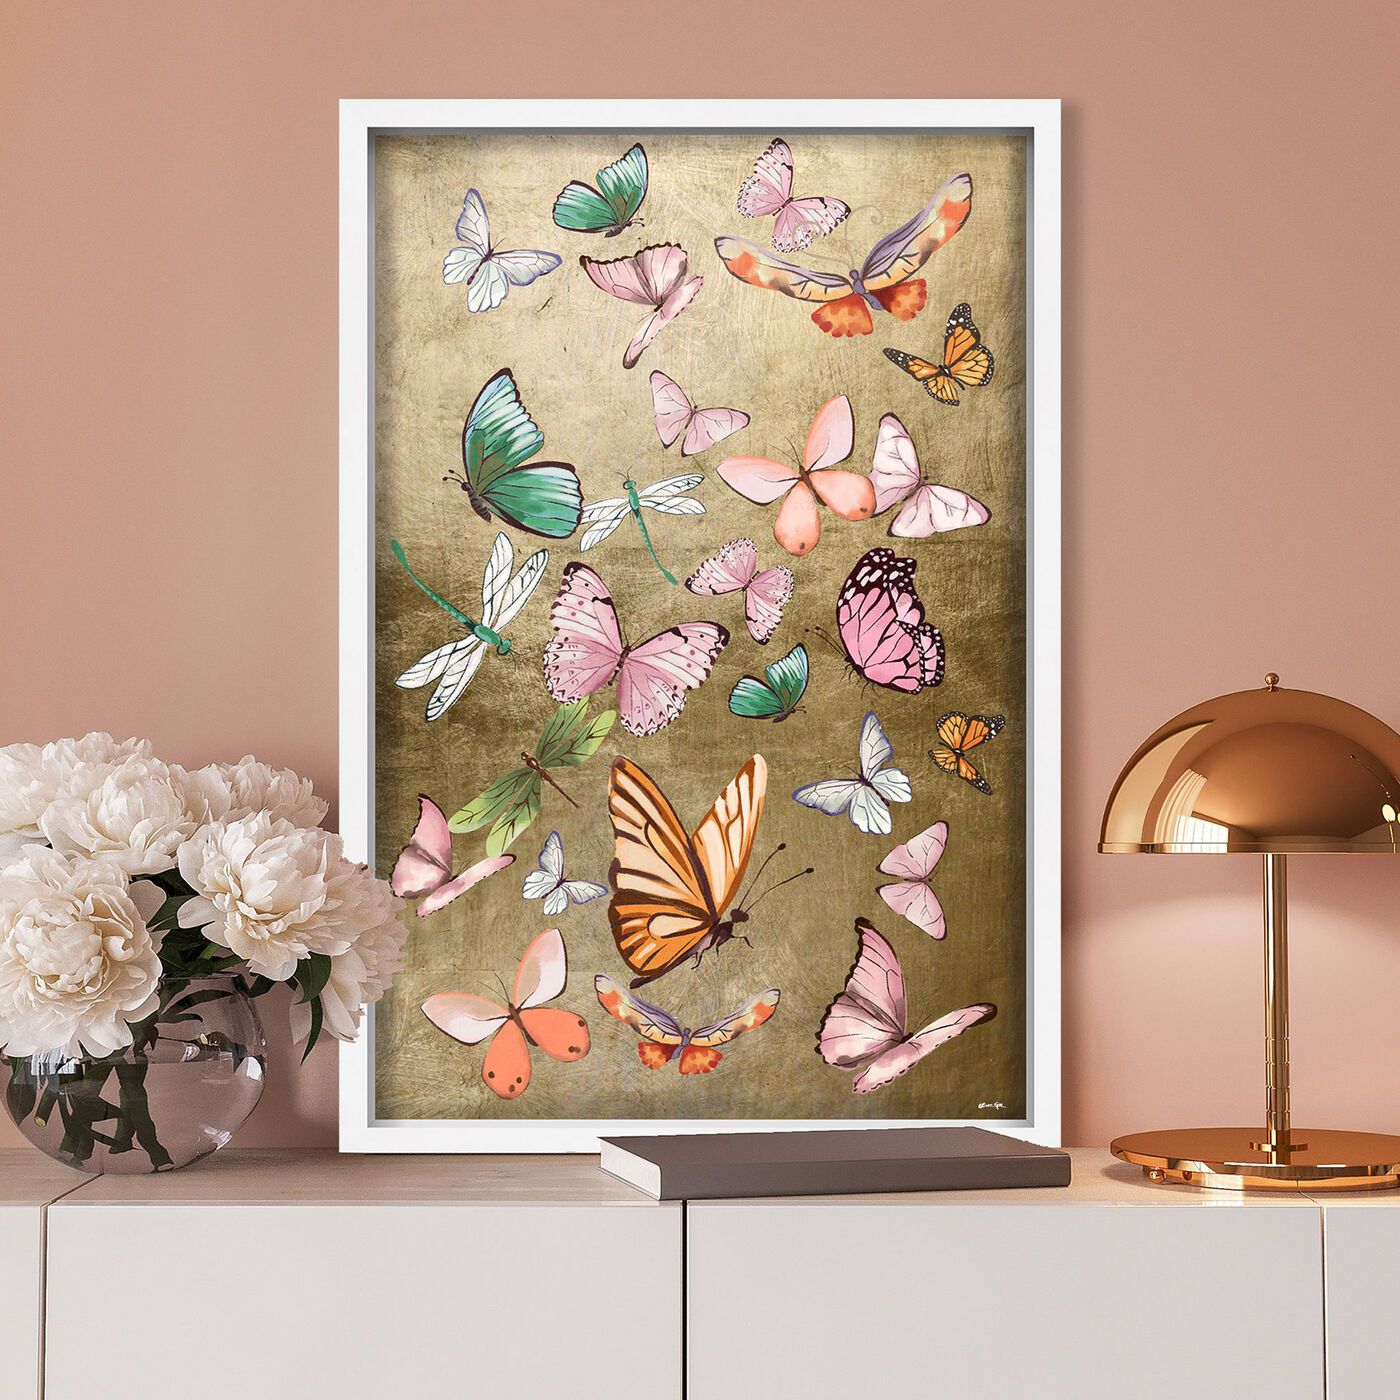 Flying Over Gold - With Hand-Applied Gold Leaf | Animals Wall Art by The Oliver Gal | Oliver Gal